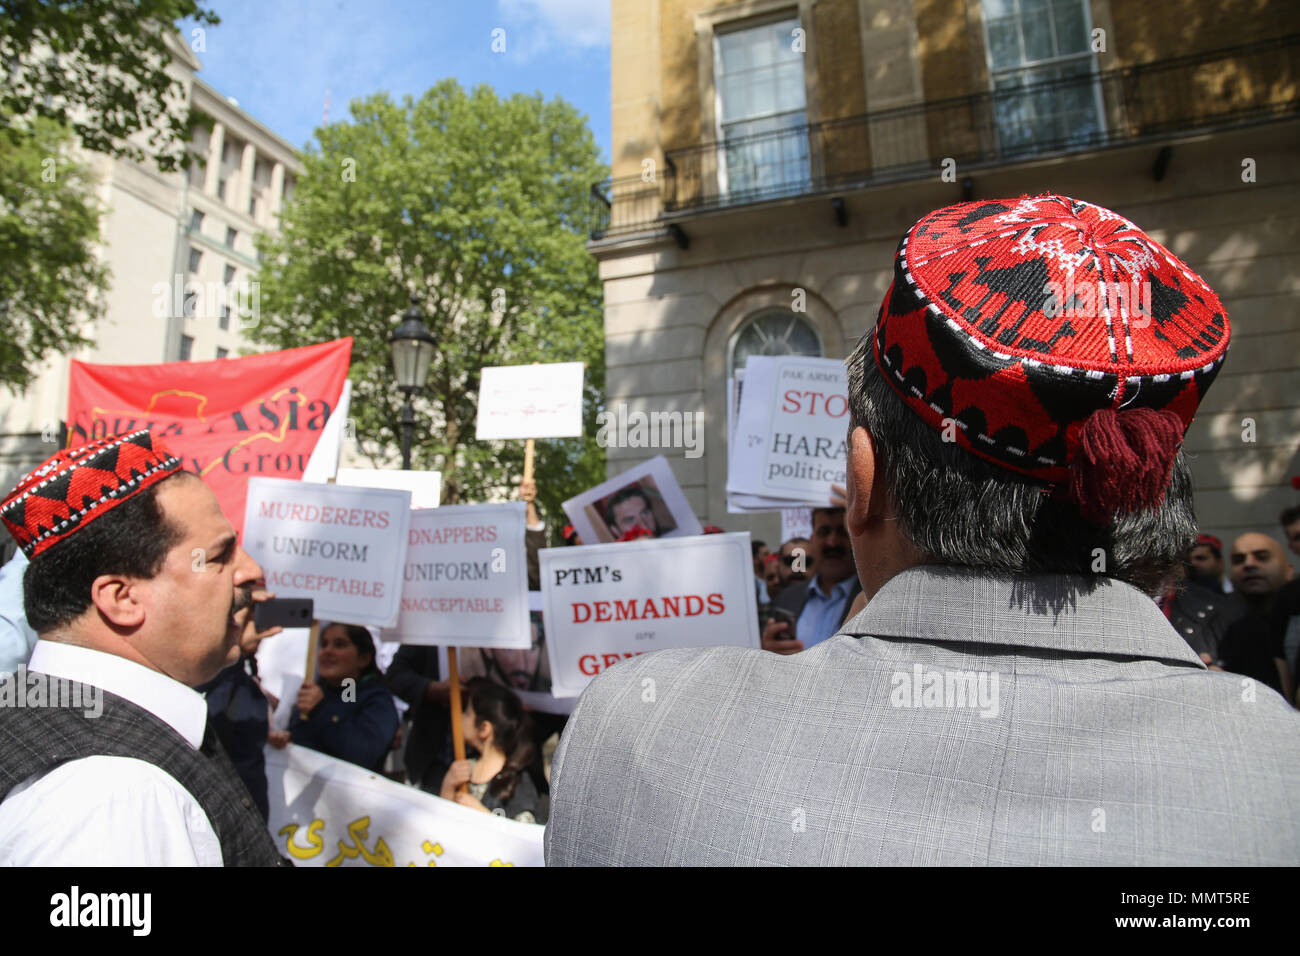 London UK 13 May 2018 Pakistanis Pashtuns wearing their traditional Pakol,soft round-topped hat,protesting outside Downing Street asking the British Government to help them to stop the disappearance and torture by the Pakistani army of their people. Pashtuns are predominantly an Eastern Iranian people, who use Pashto as their first language, and live in Pakistan and Afghanistan.@Paul Quezada-Neiman/Alamy Live News Stock Photo